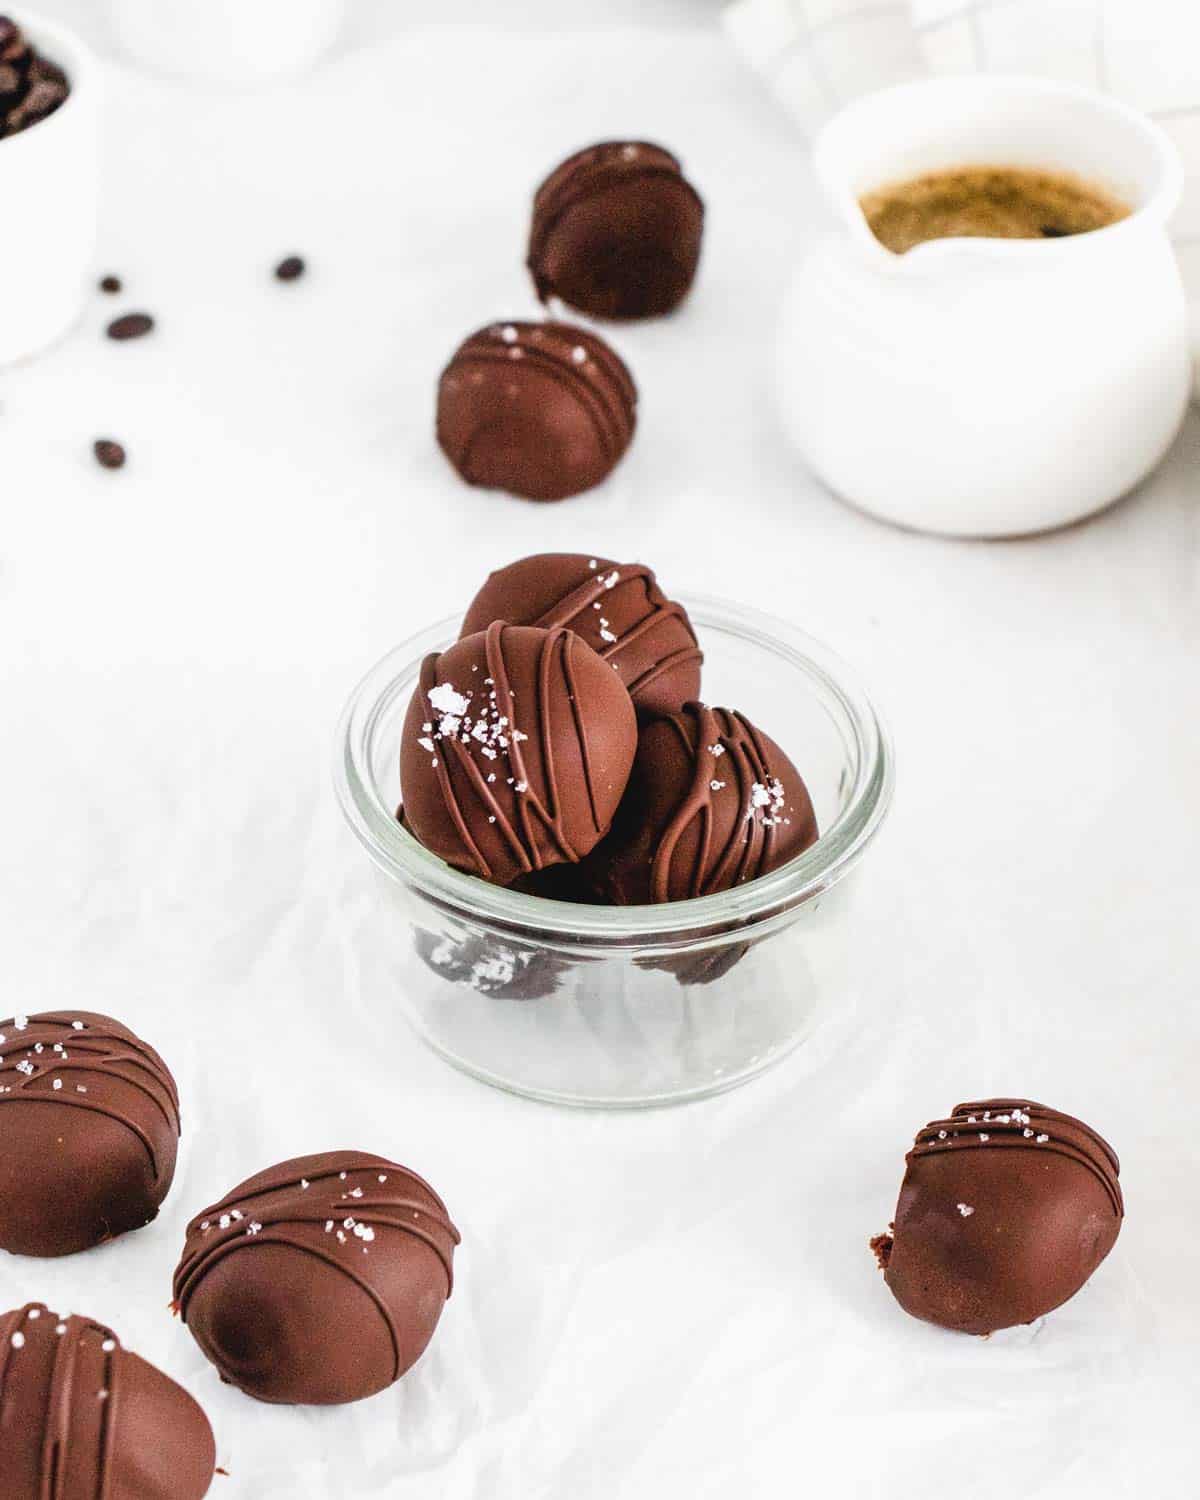 Mocha Chocolate Truffles topped with sea salt and a drizzle of chocolate